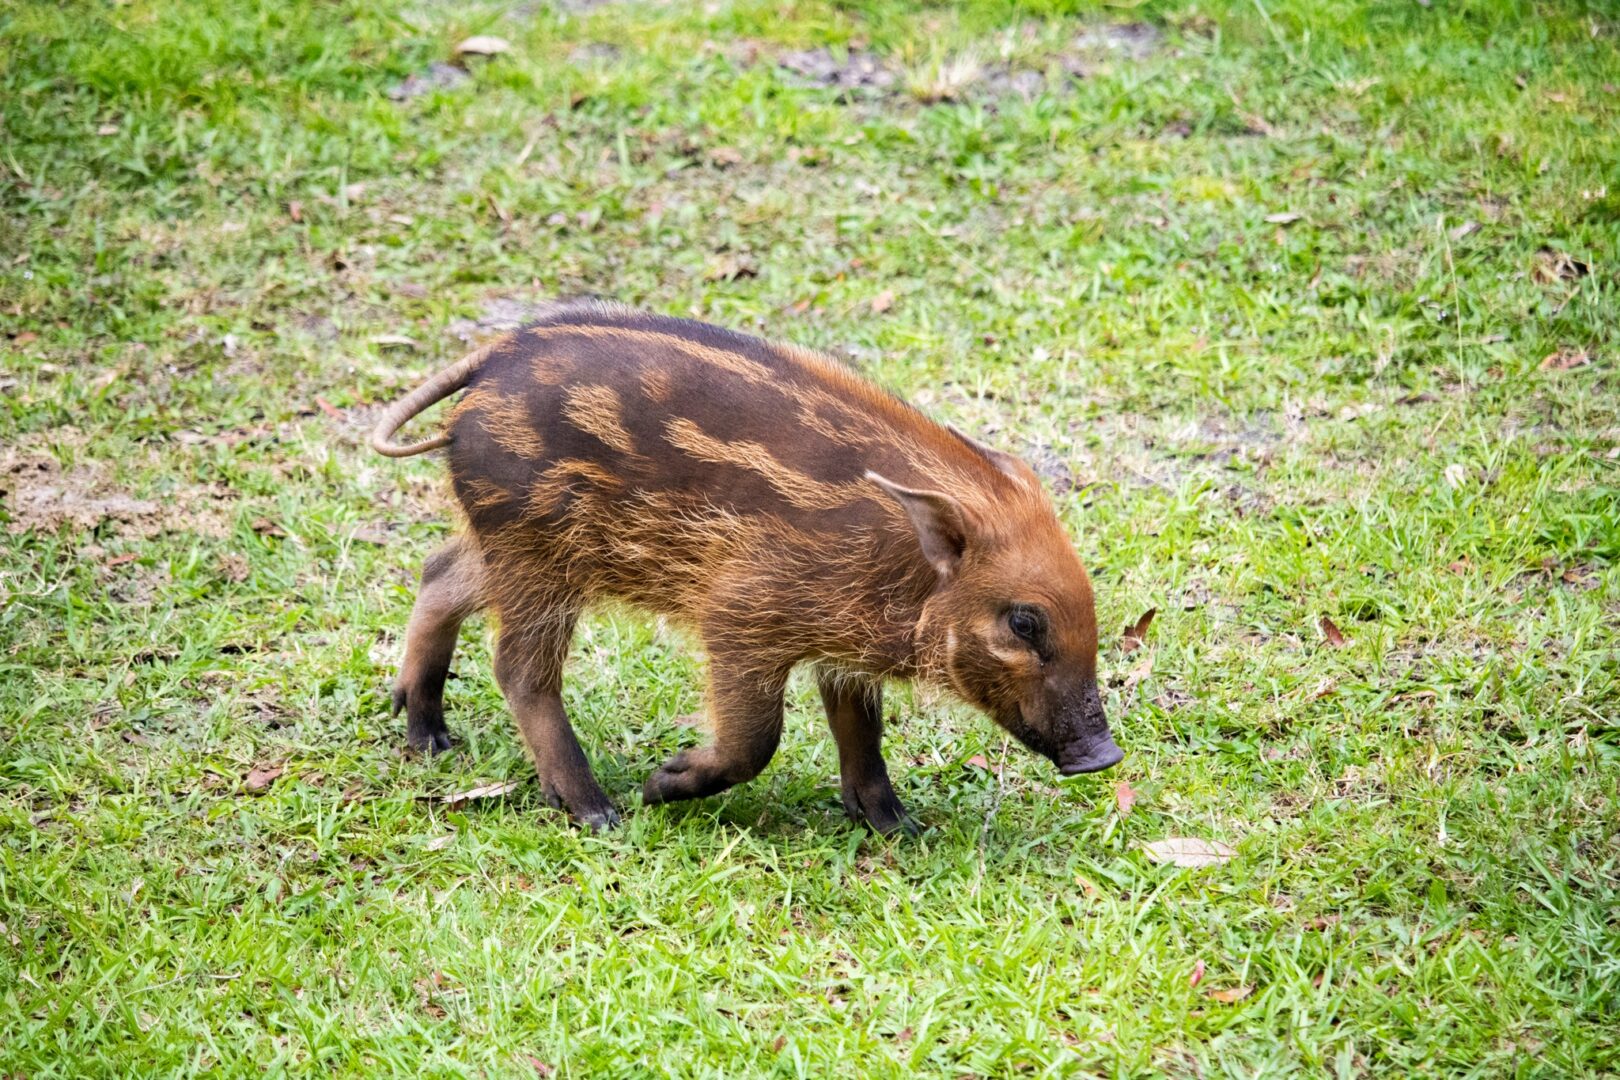 Introducing Walter: The Adorable Baby River Hog Piglet Finds His Home at Disney’s Animal Kingdom Lodge